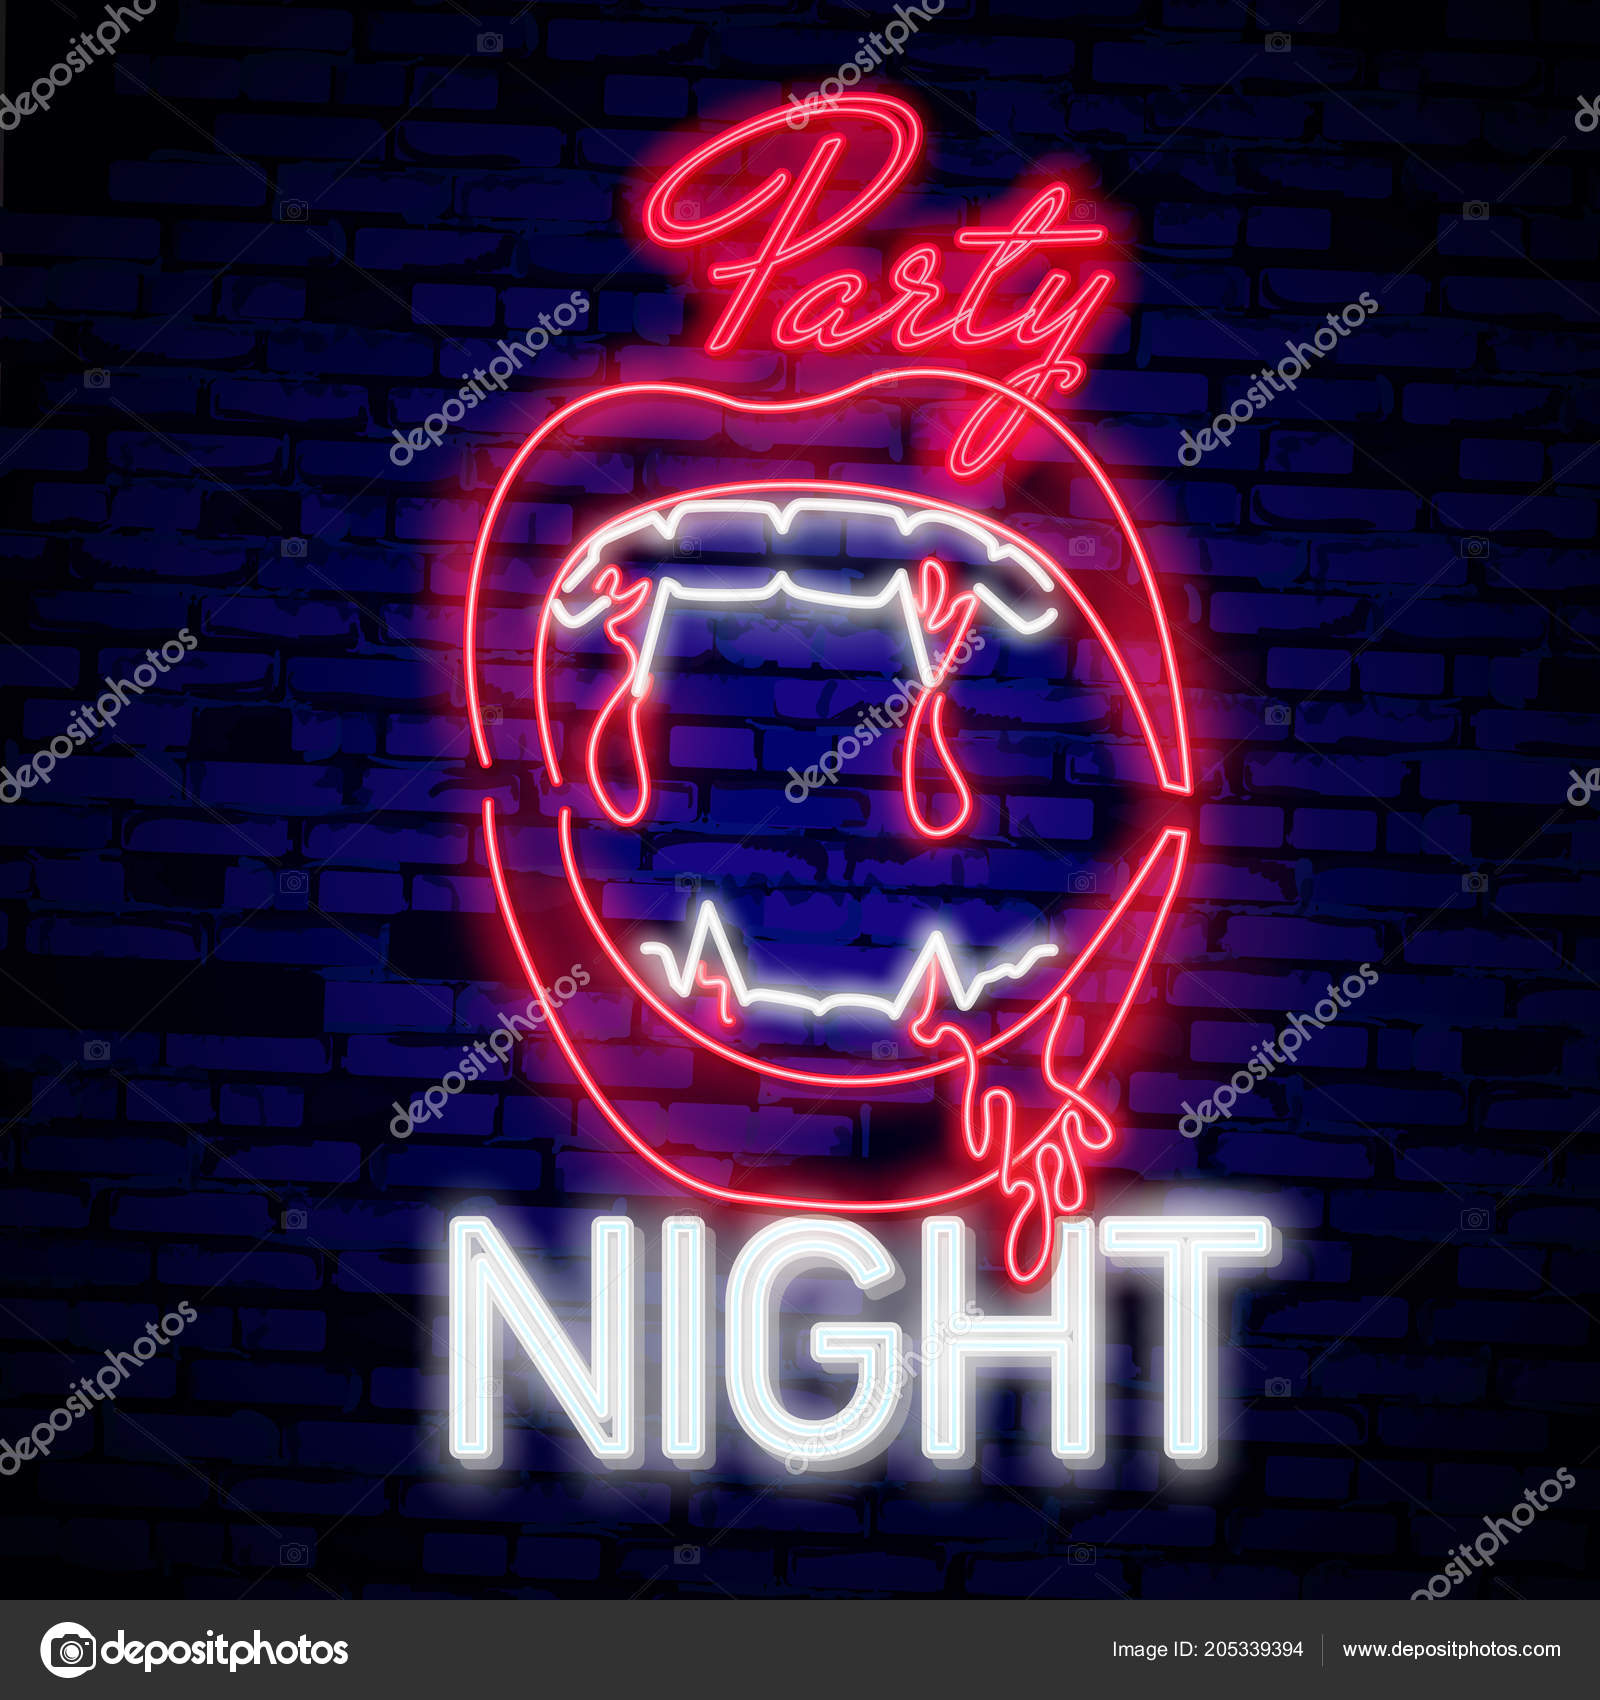 Count Dracula led neon sign Happy Halloween Vampire led neon sign helloween neon sign